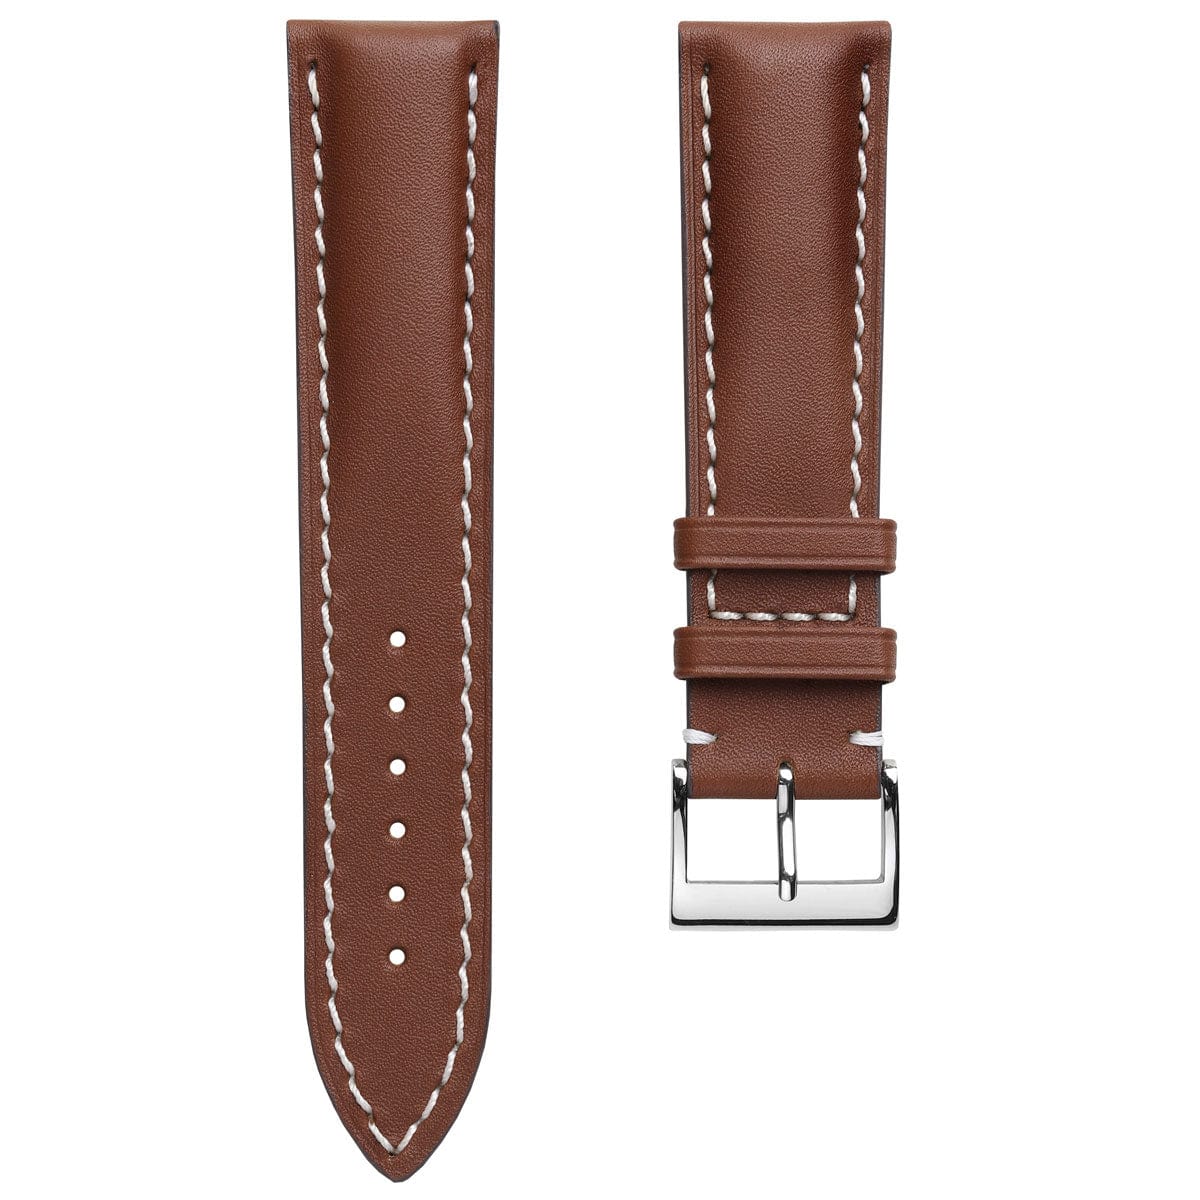 Ostend Baranil Thick Padded Leather Watch Strap - Cognac